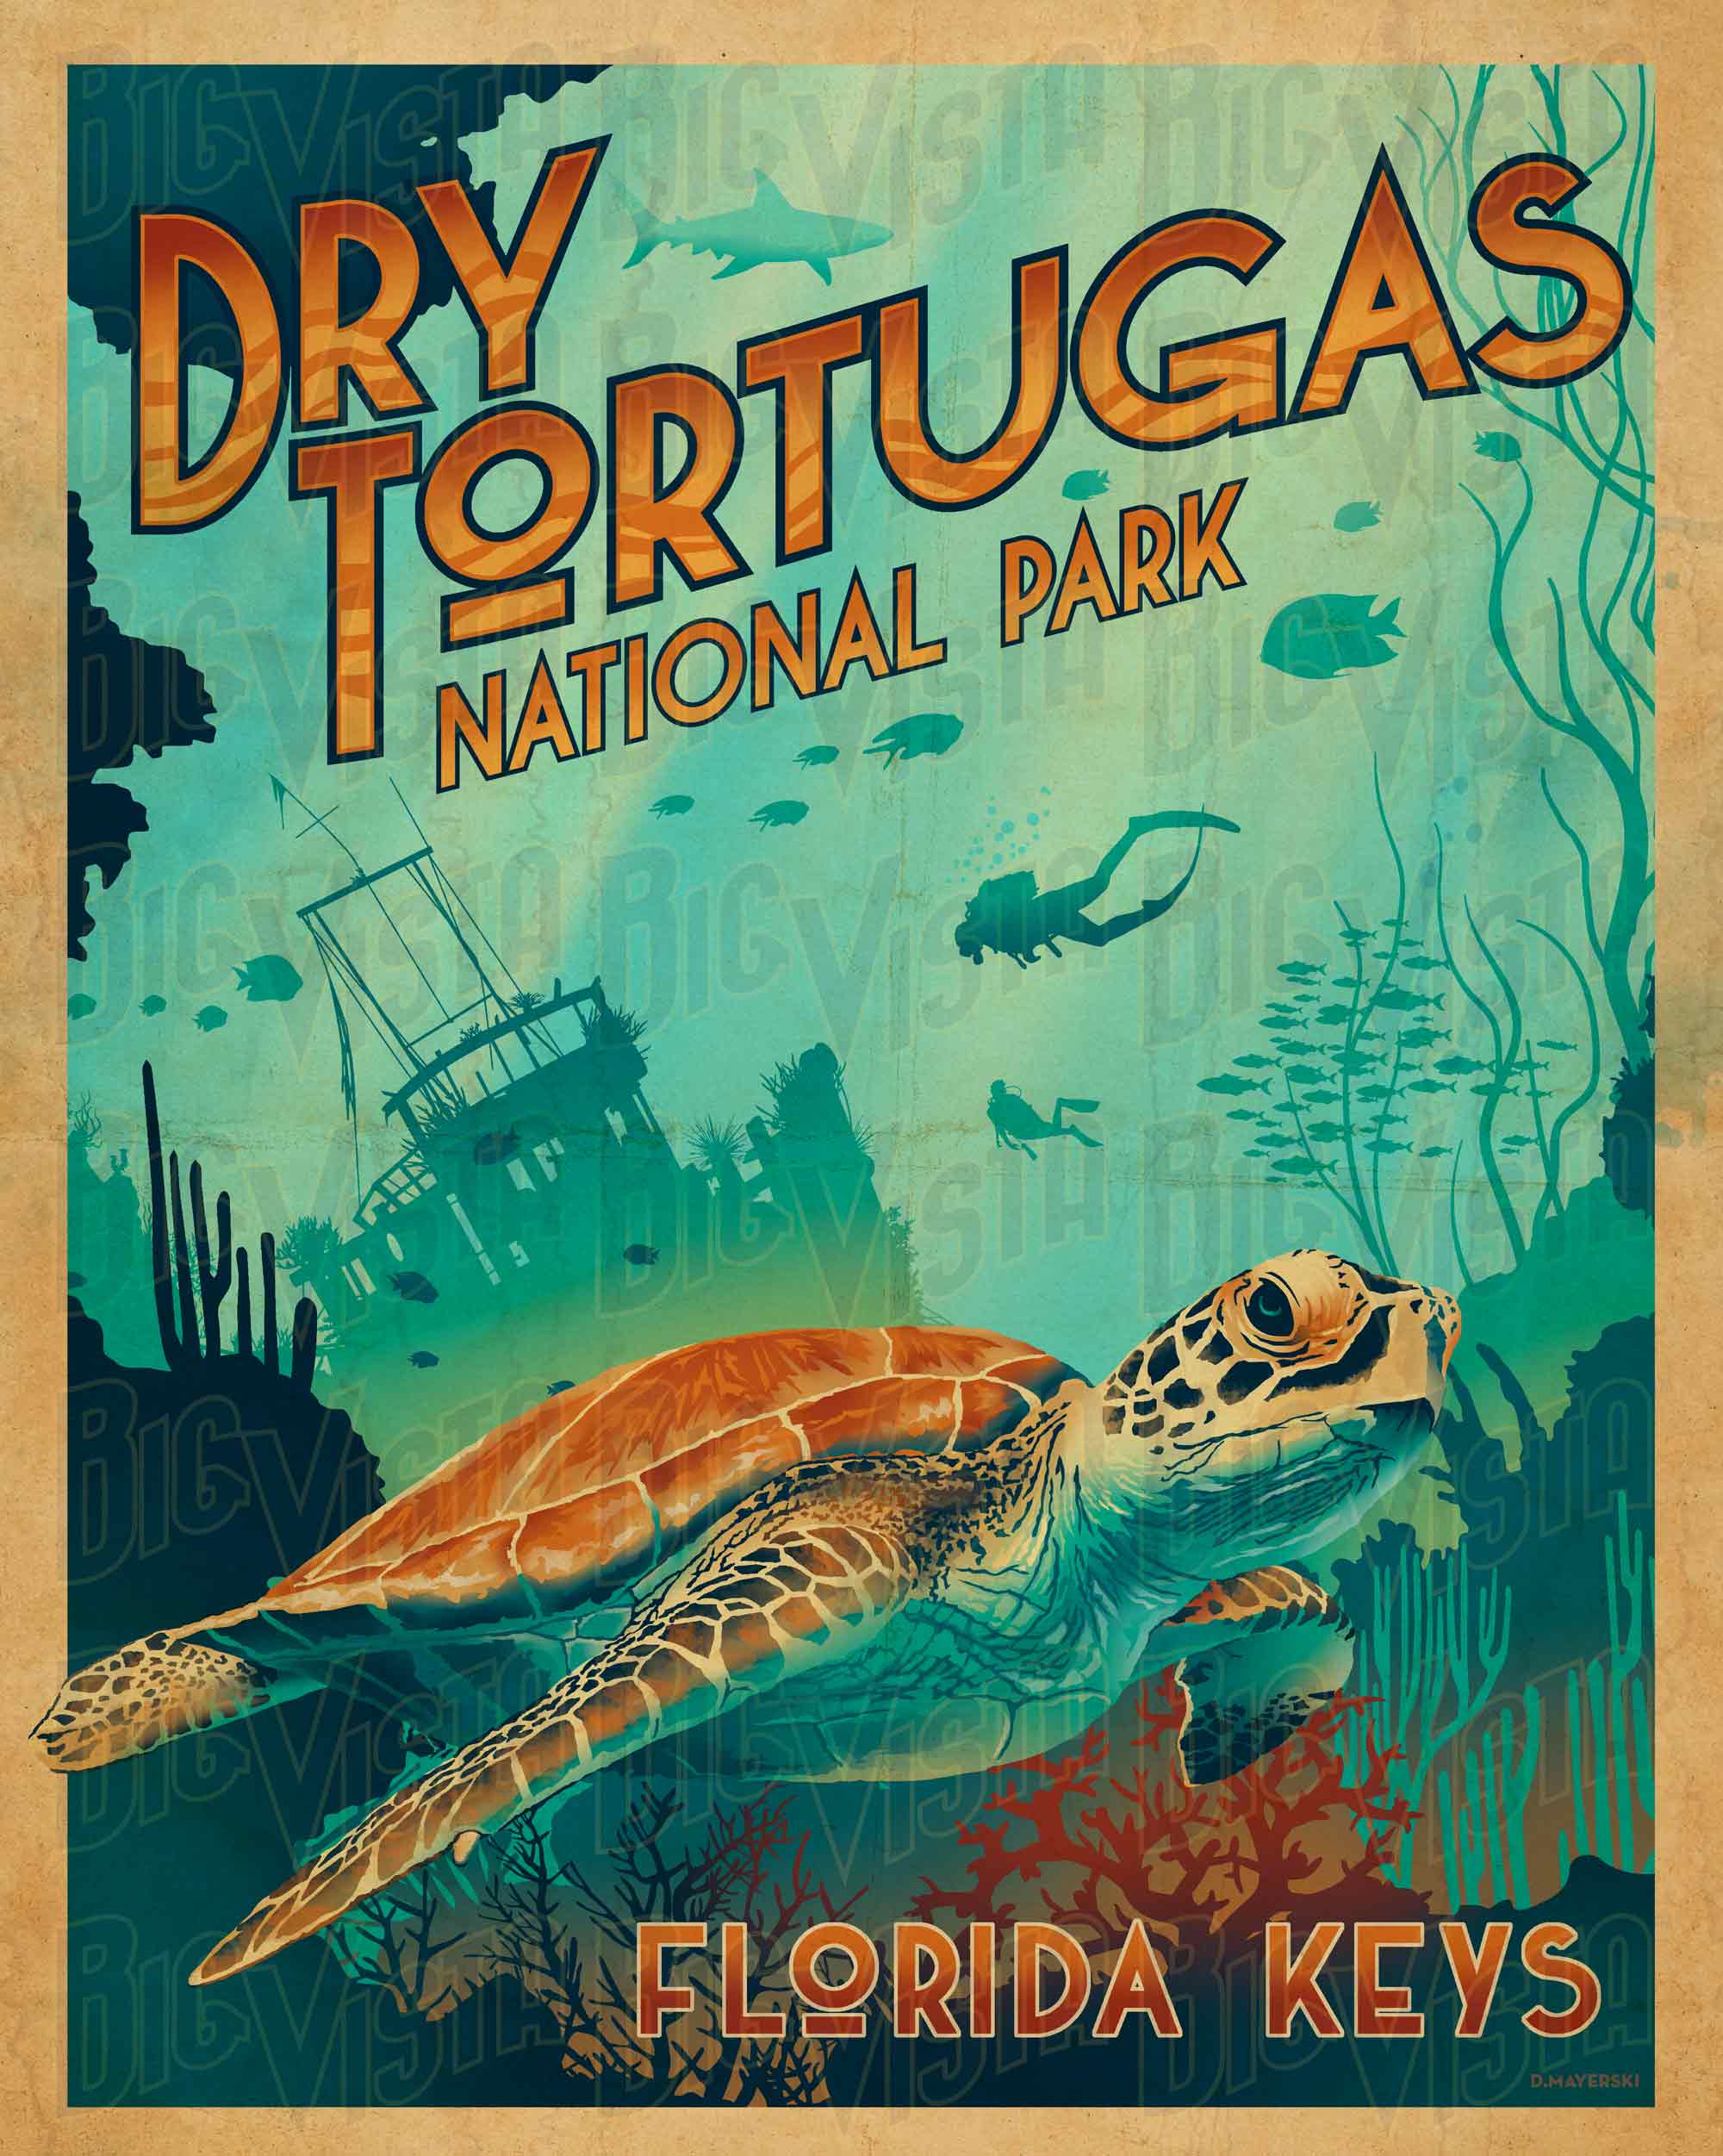 Dry Tortugas National Park poster